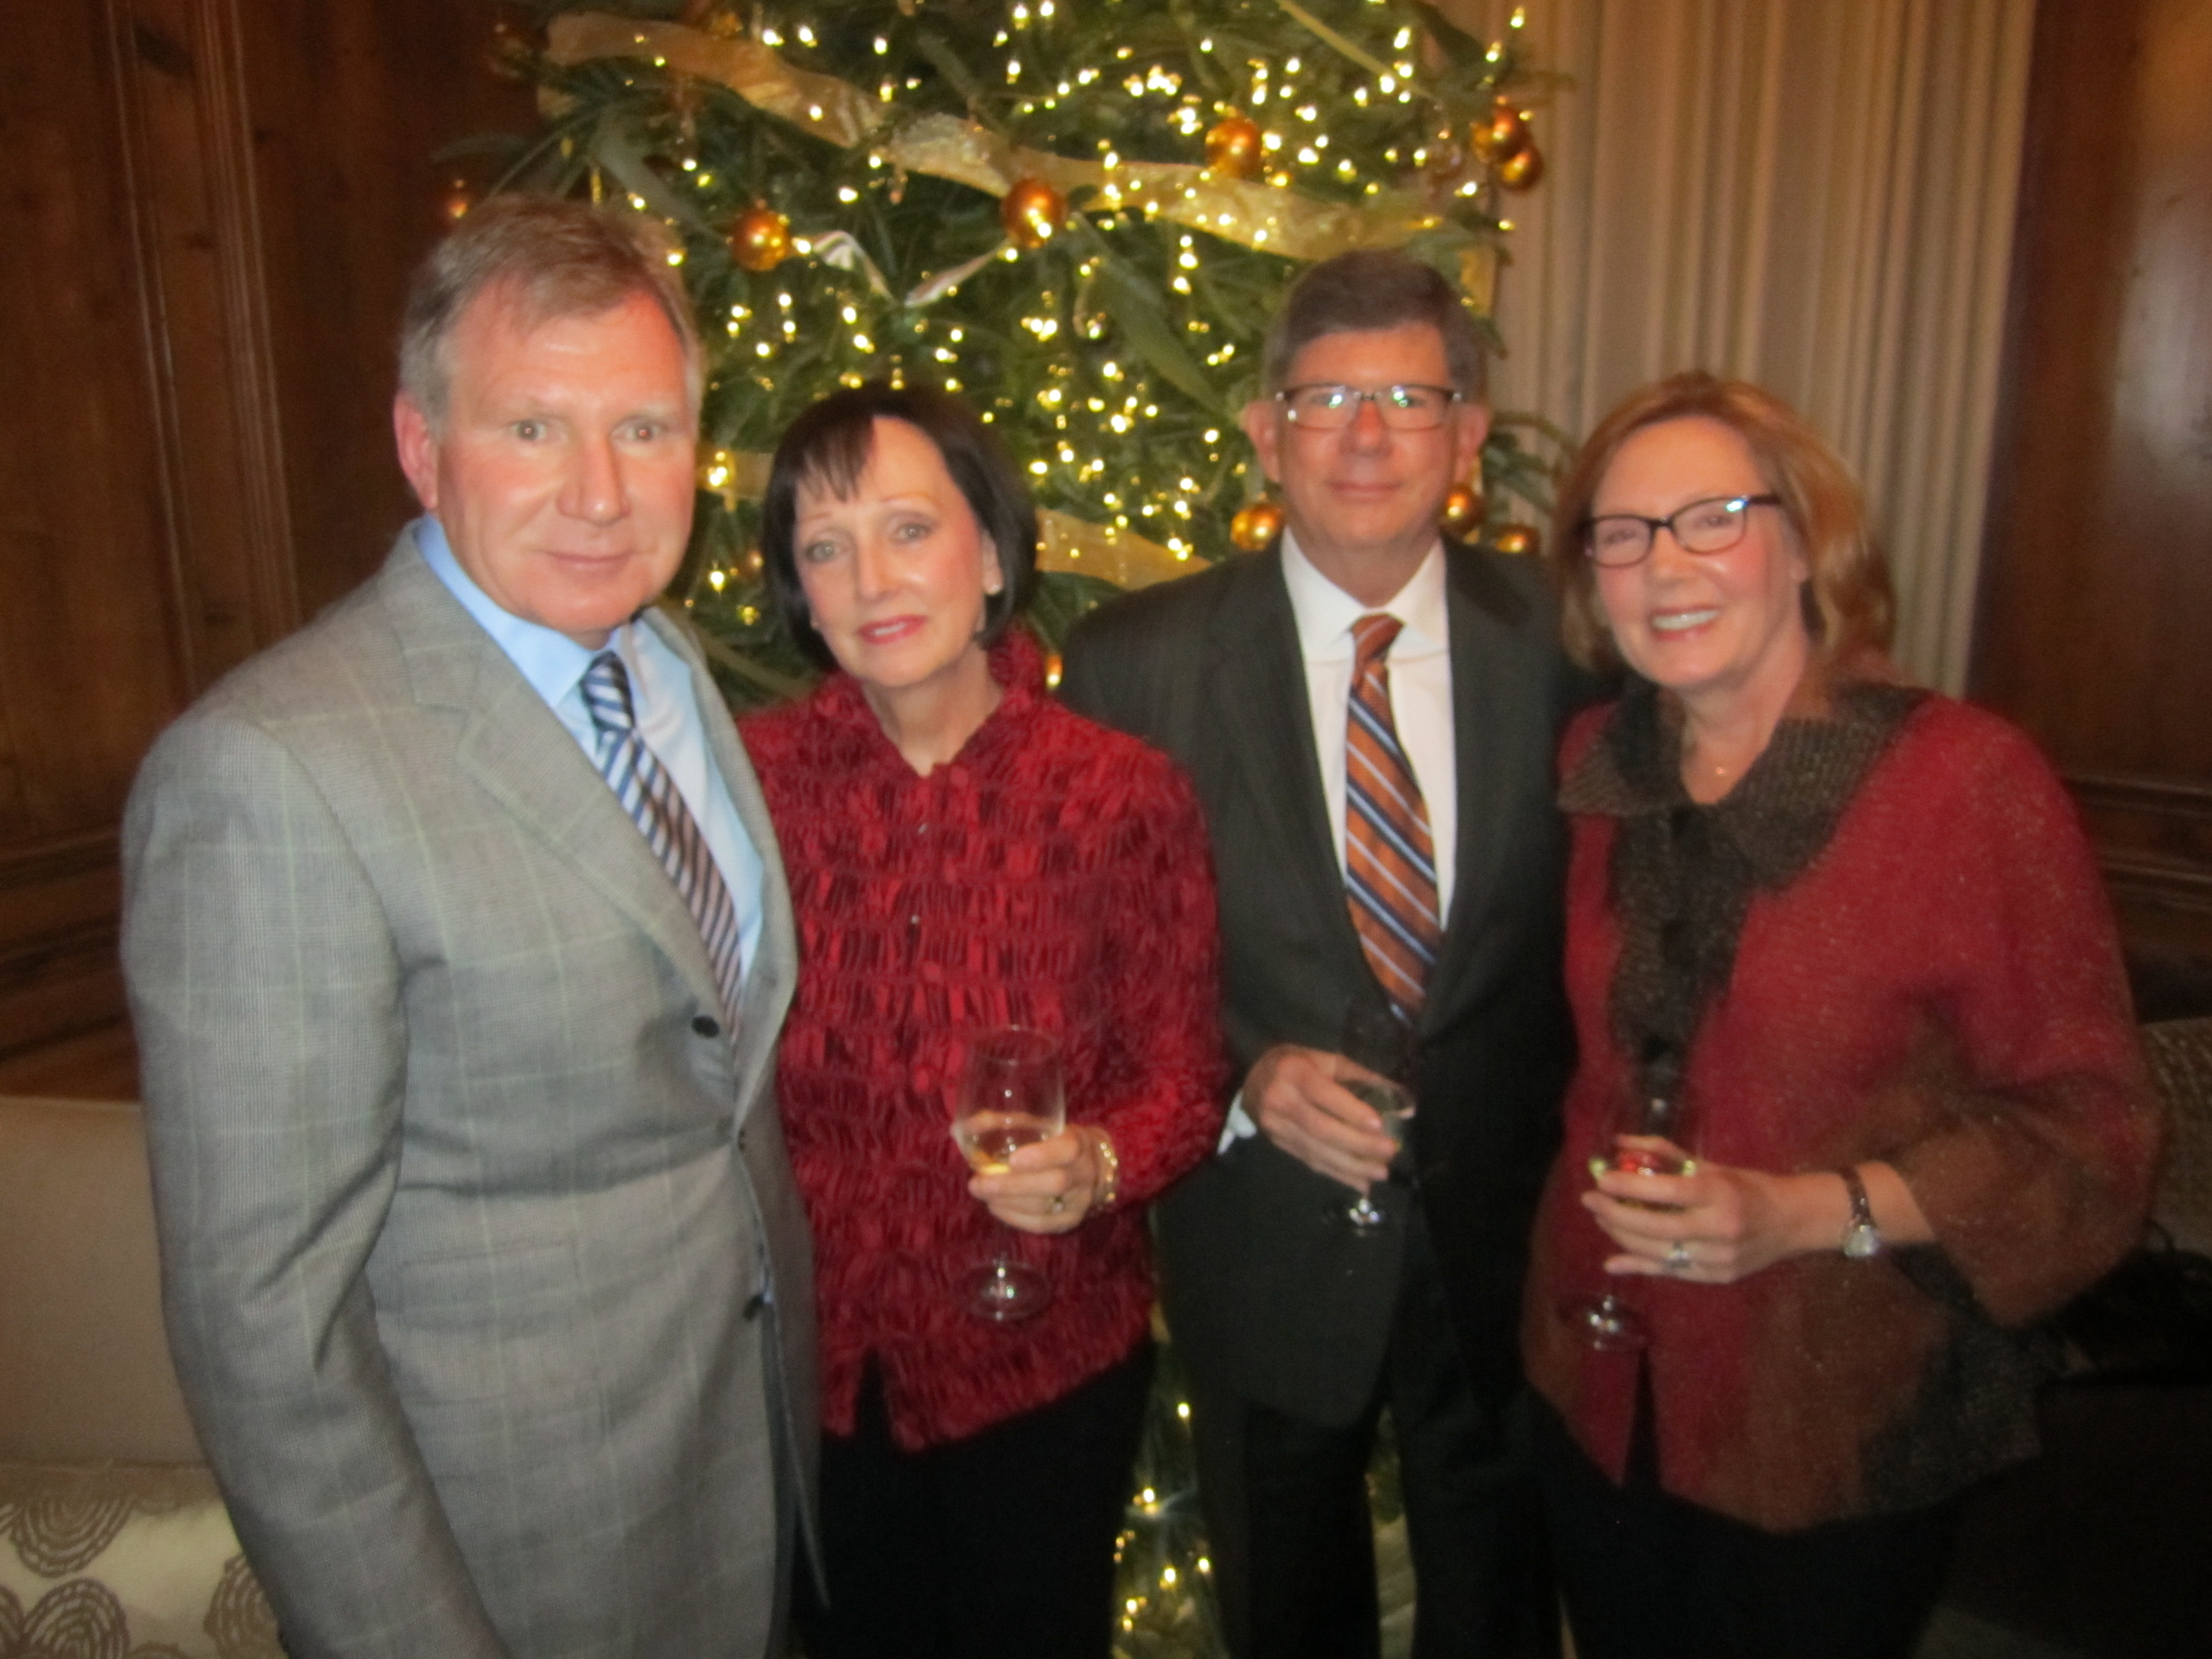 Evermay’s Foundation Fetes the Holidays with Music at the Mansion